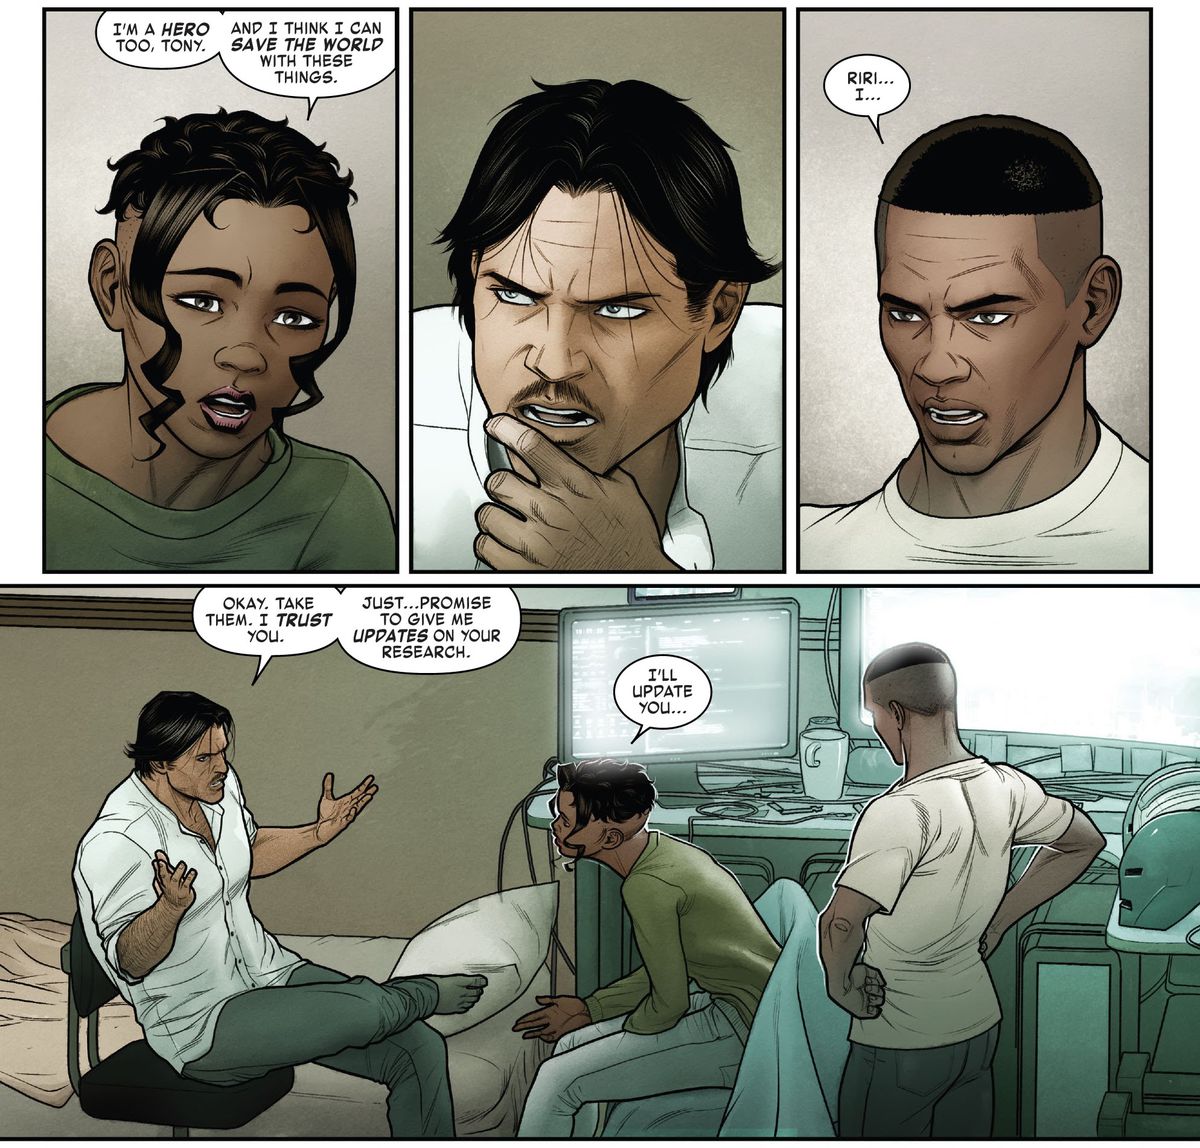 “I’m a hero too, Tony,” Riri insists. “And I think I can save the world with these things.” Tony thinks for a long beat, before saying “Okay, take them. I trust you,” in Iron Man #24 (2022)